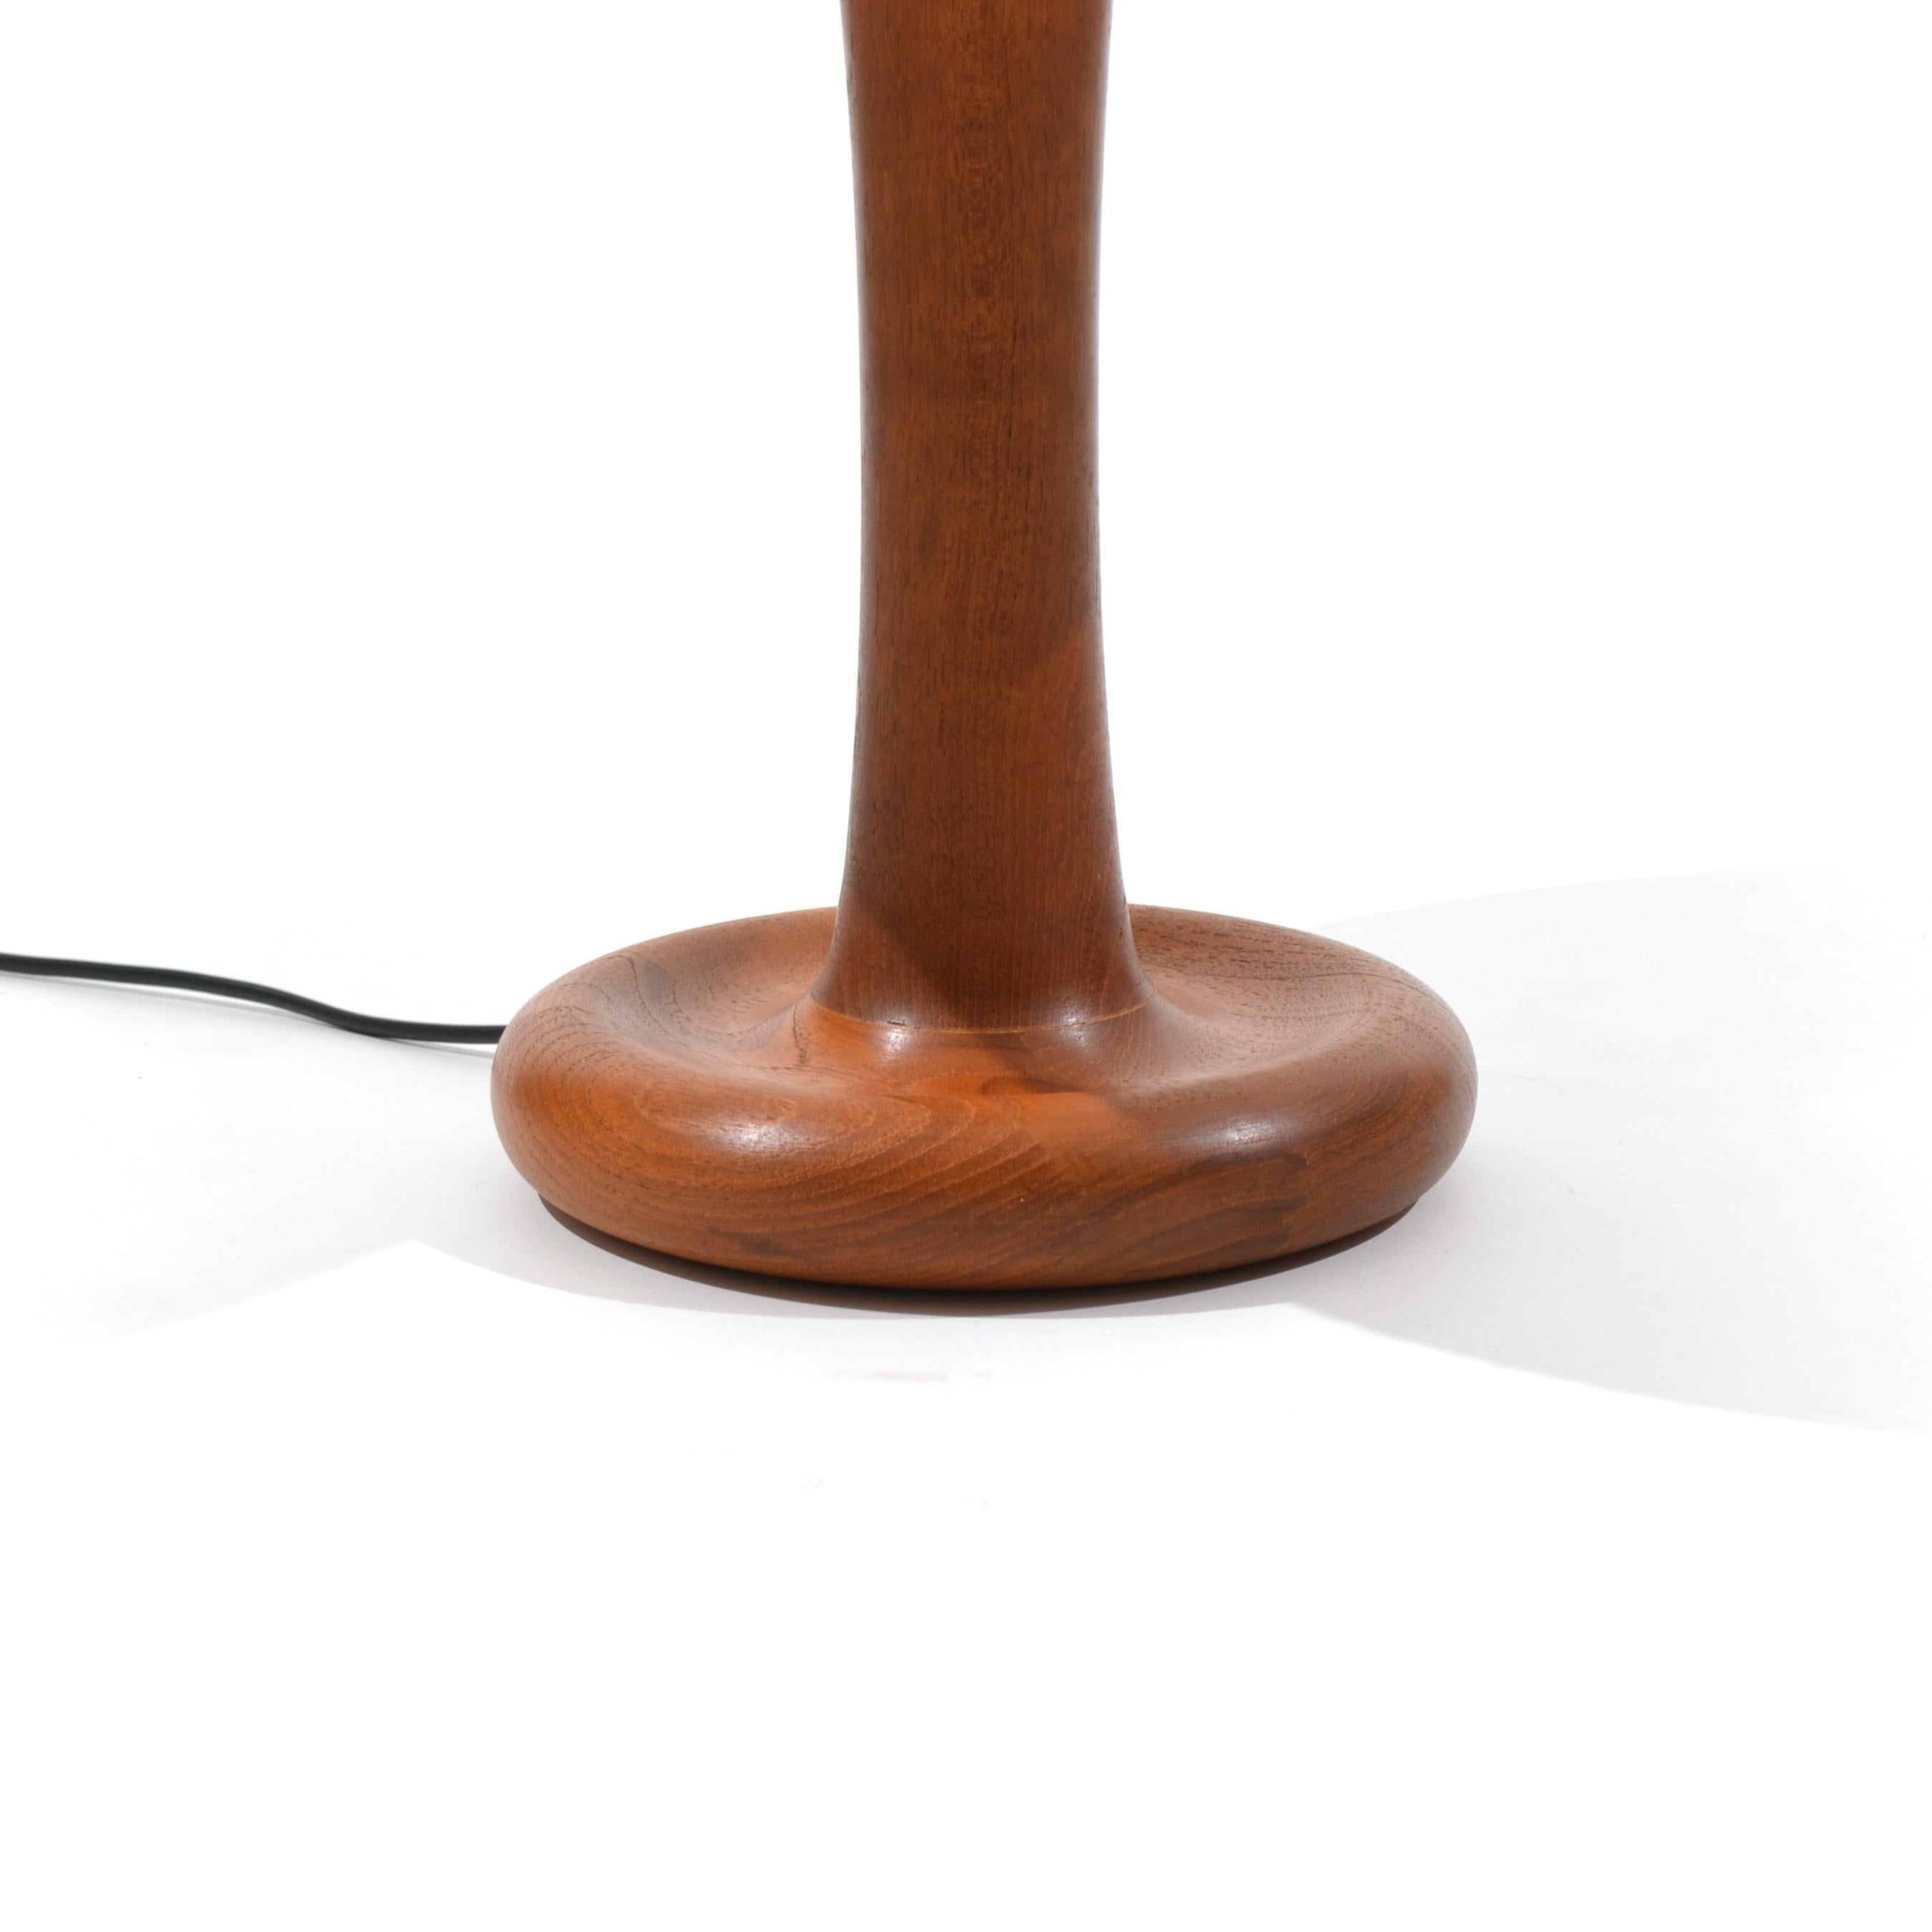 All round!

A generous piece of teak transformed into a lamp that could not be more organic. A chunky, plump line and a pleasant light diffused through its mottled beige lampshade.

If Dyrlund prides itself on having had prestigious and unusual